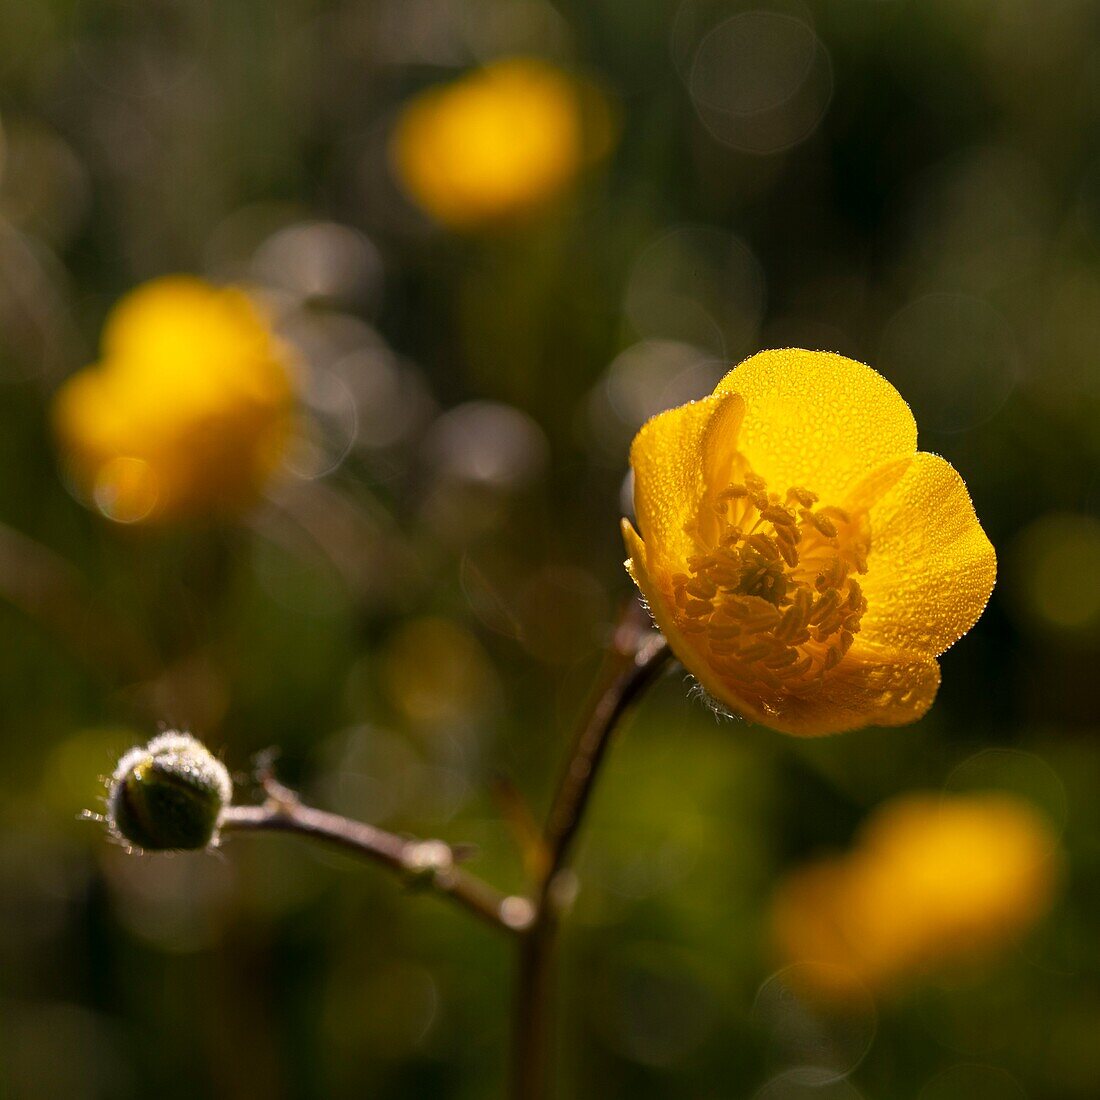 France, Ardennes, Carignan, Buttercup (Ranunculus repens, Ranunculaceae) in a pasture in the spring\n